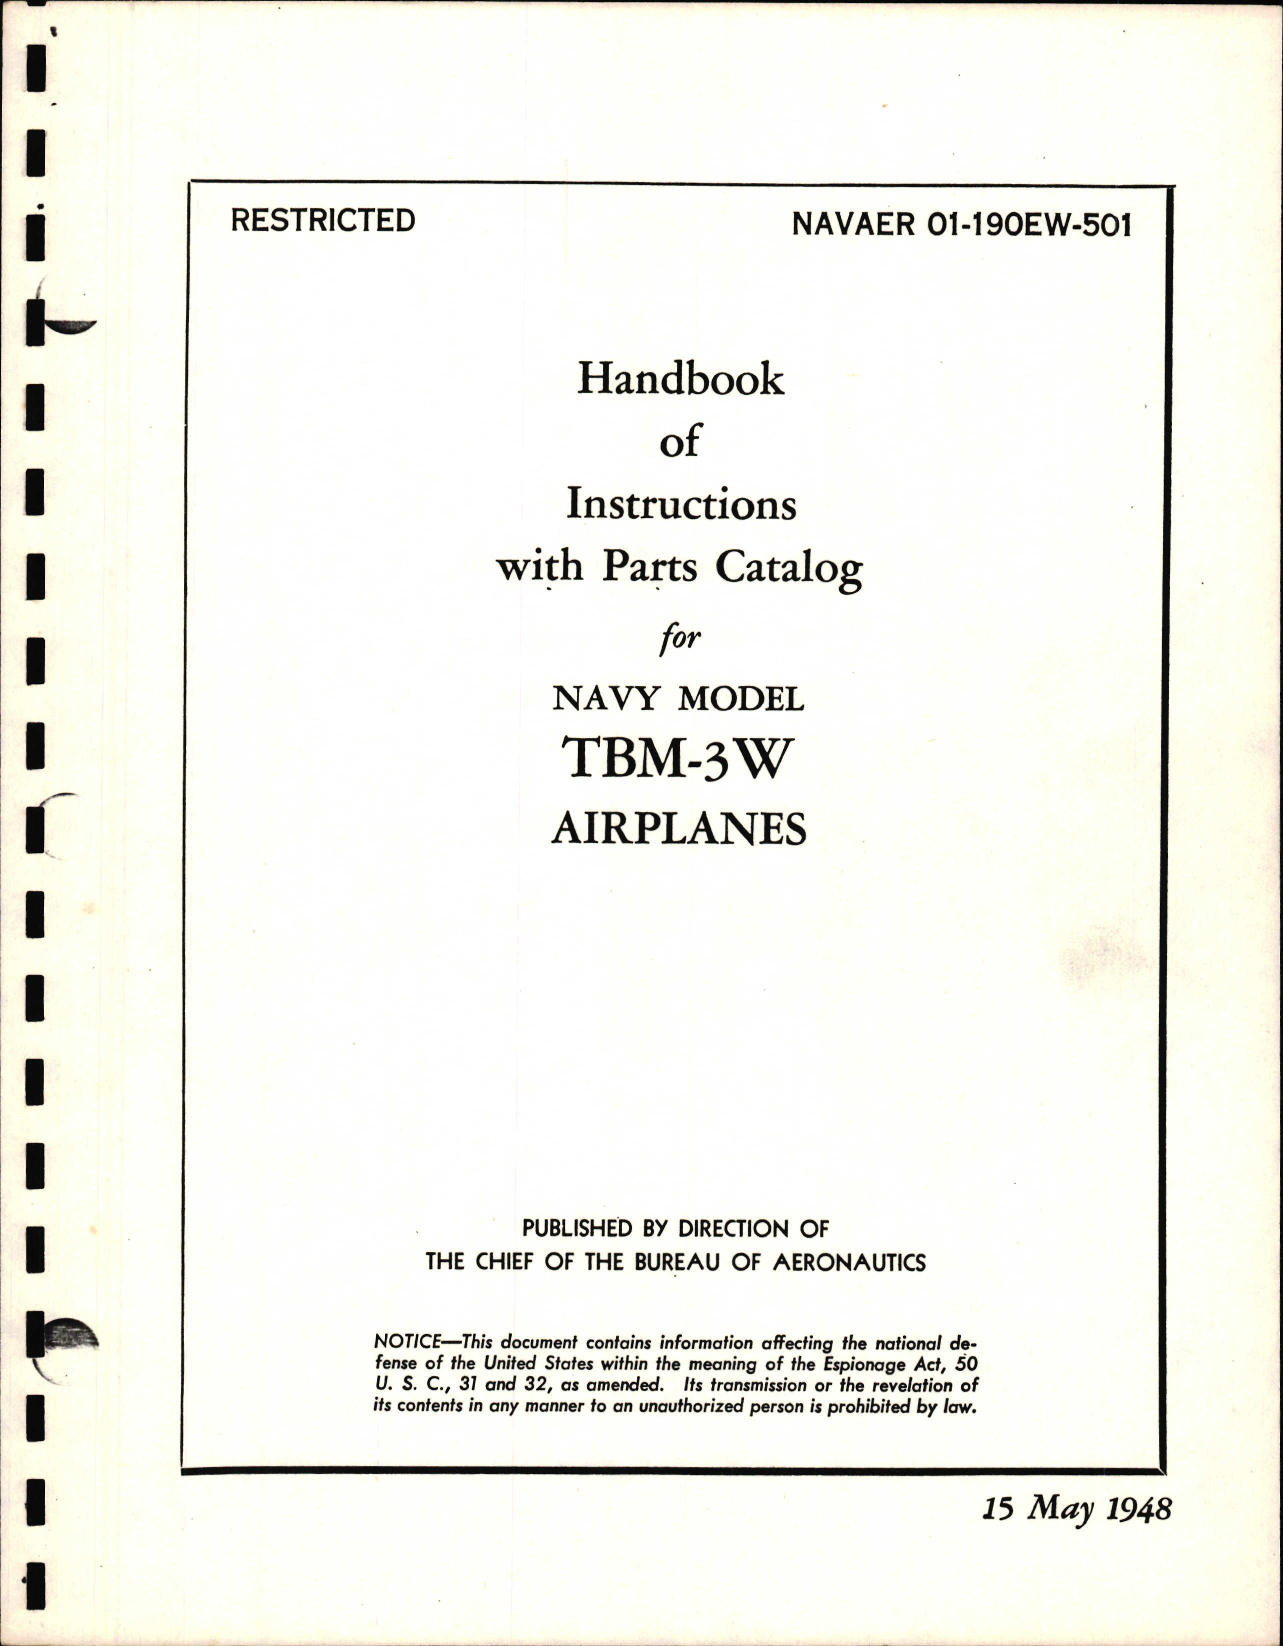 Sample page 1 from AirCorps Library document: Handbook of Instructions with Parts Catalog for TBM-3W